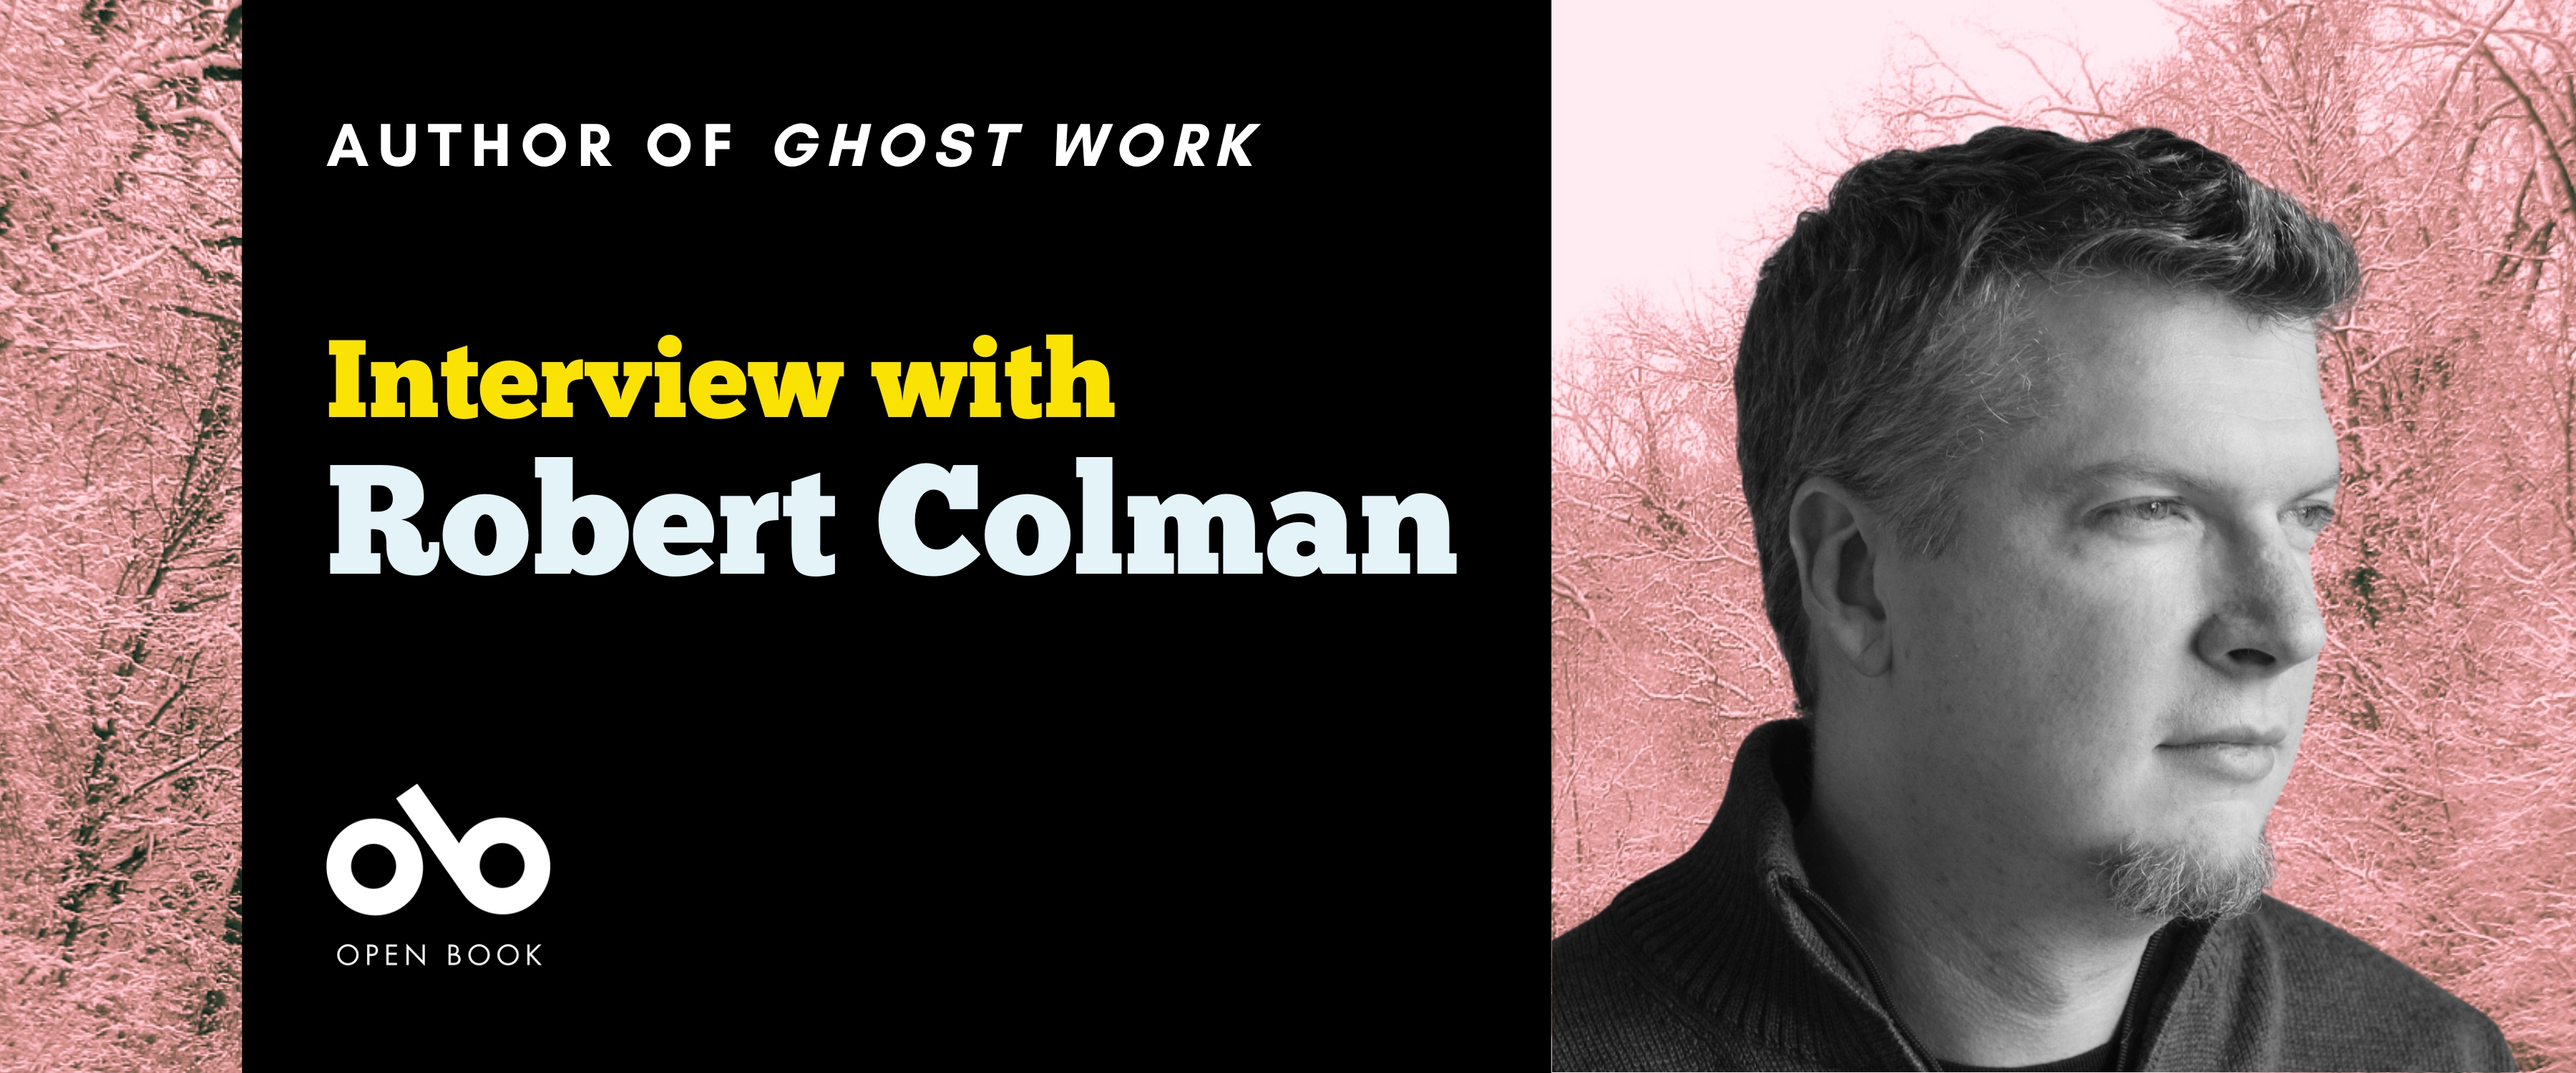 Interview banner with text over black background, bordered by image of tinted snowy forest, author Robert Colman's author photo superimposed over image of forest on right hand side of banner.